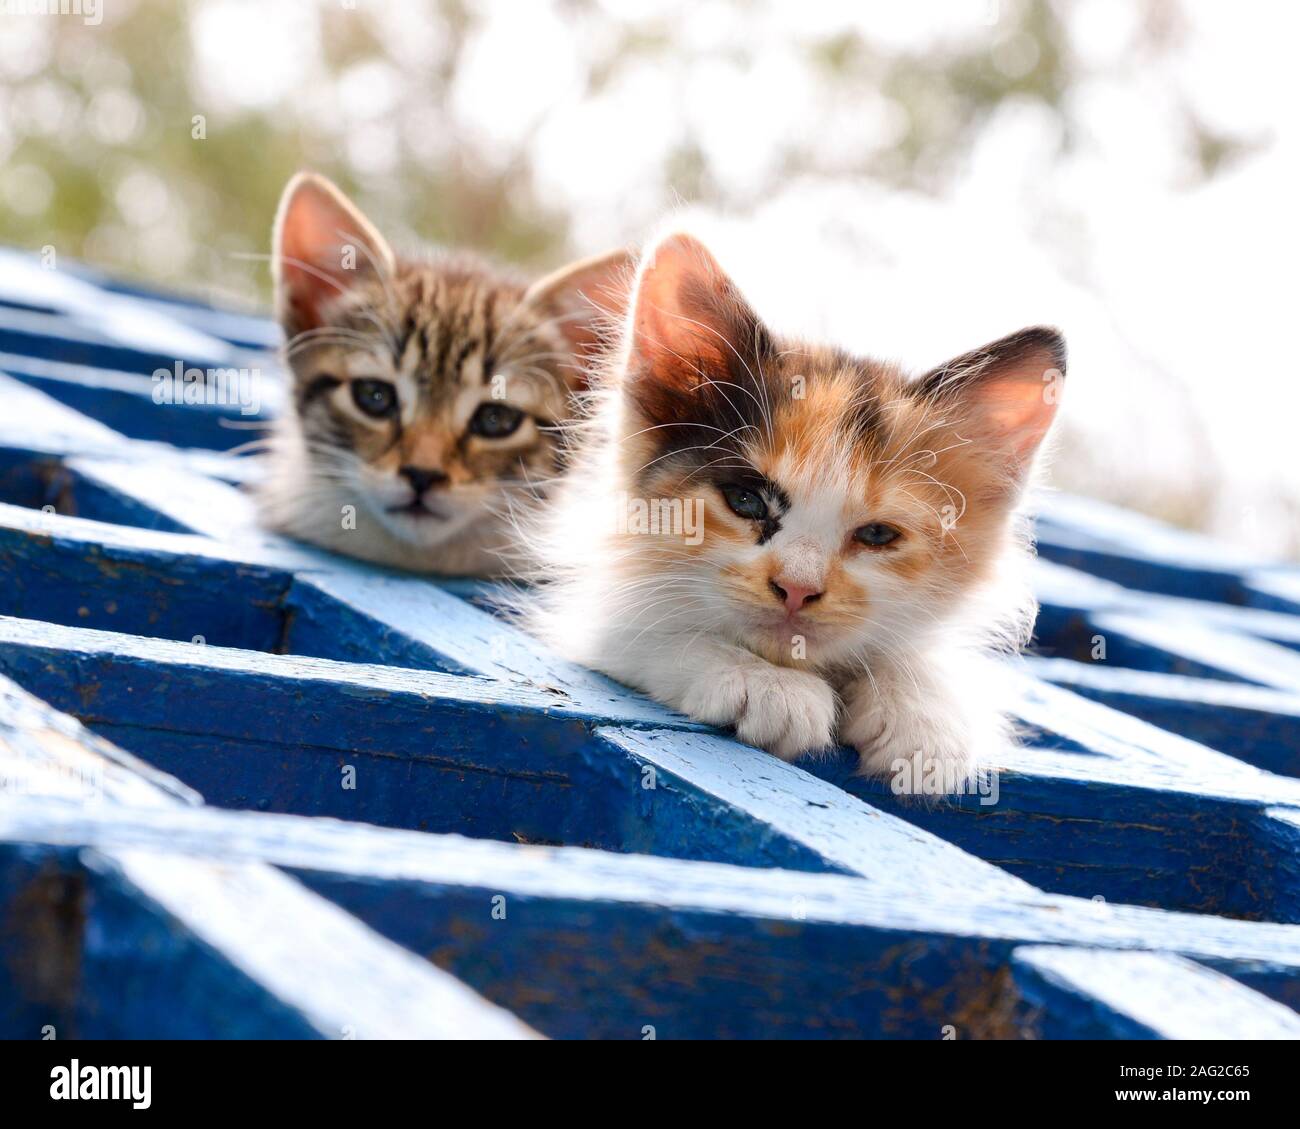 Two cute kittens perch on a roof top looking at camera Stock Photo